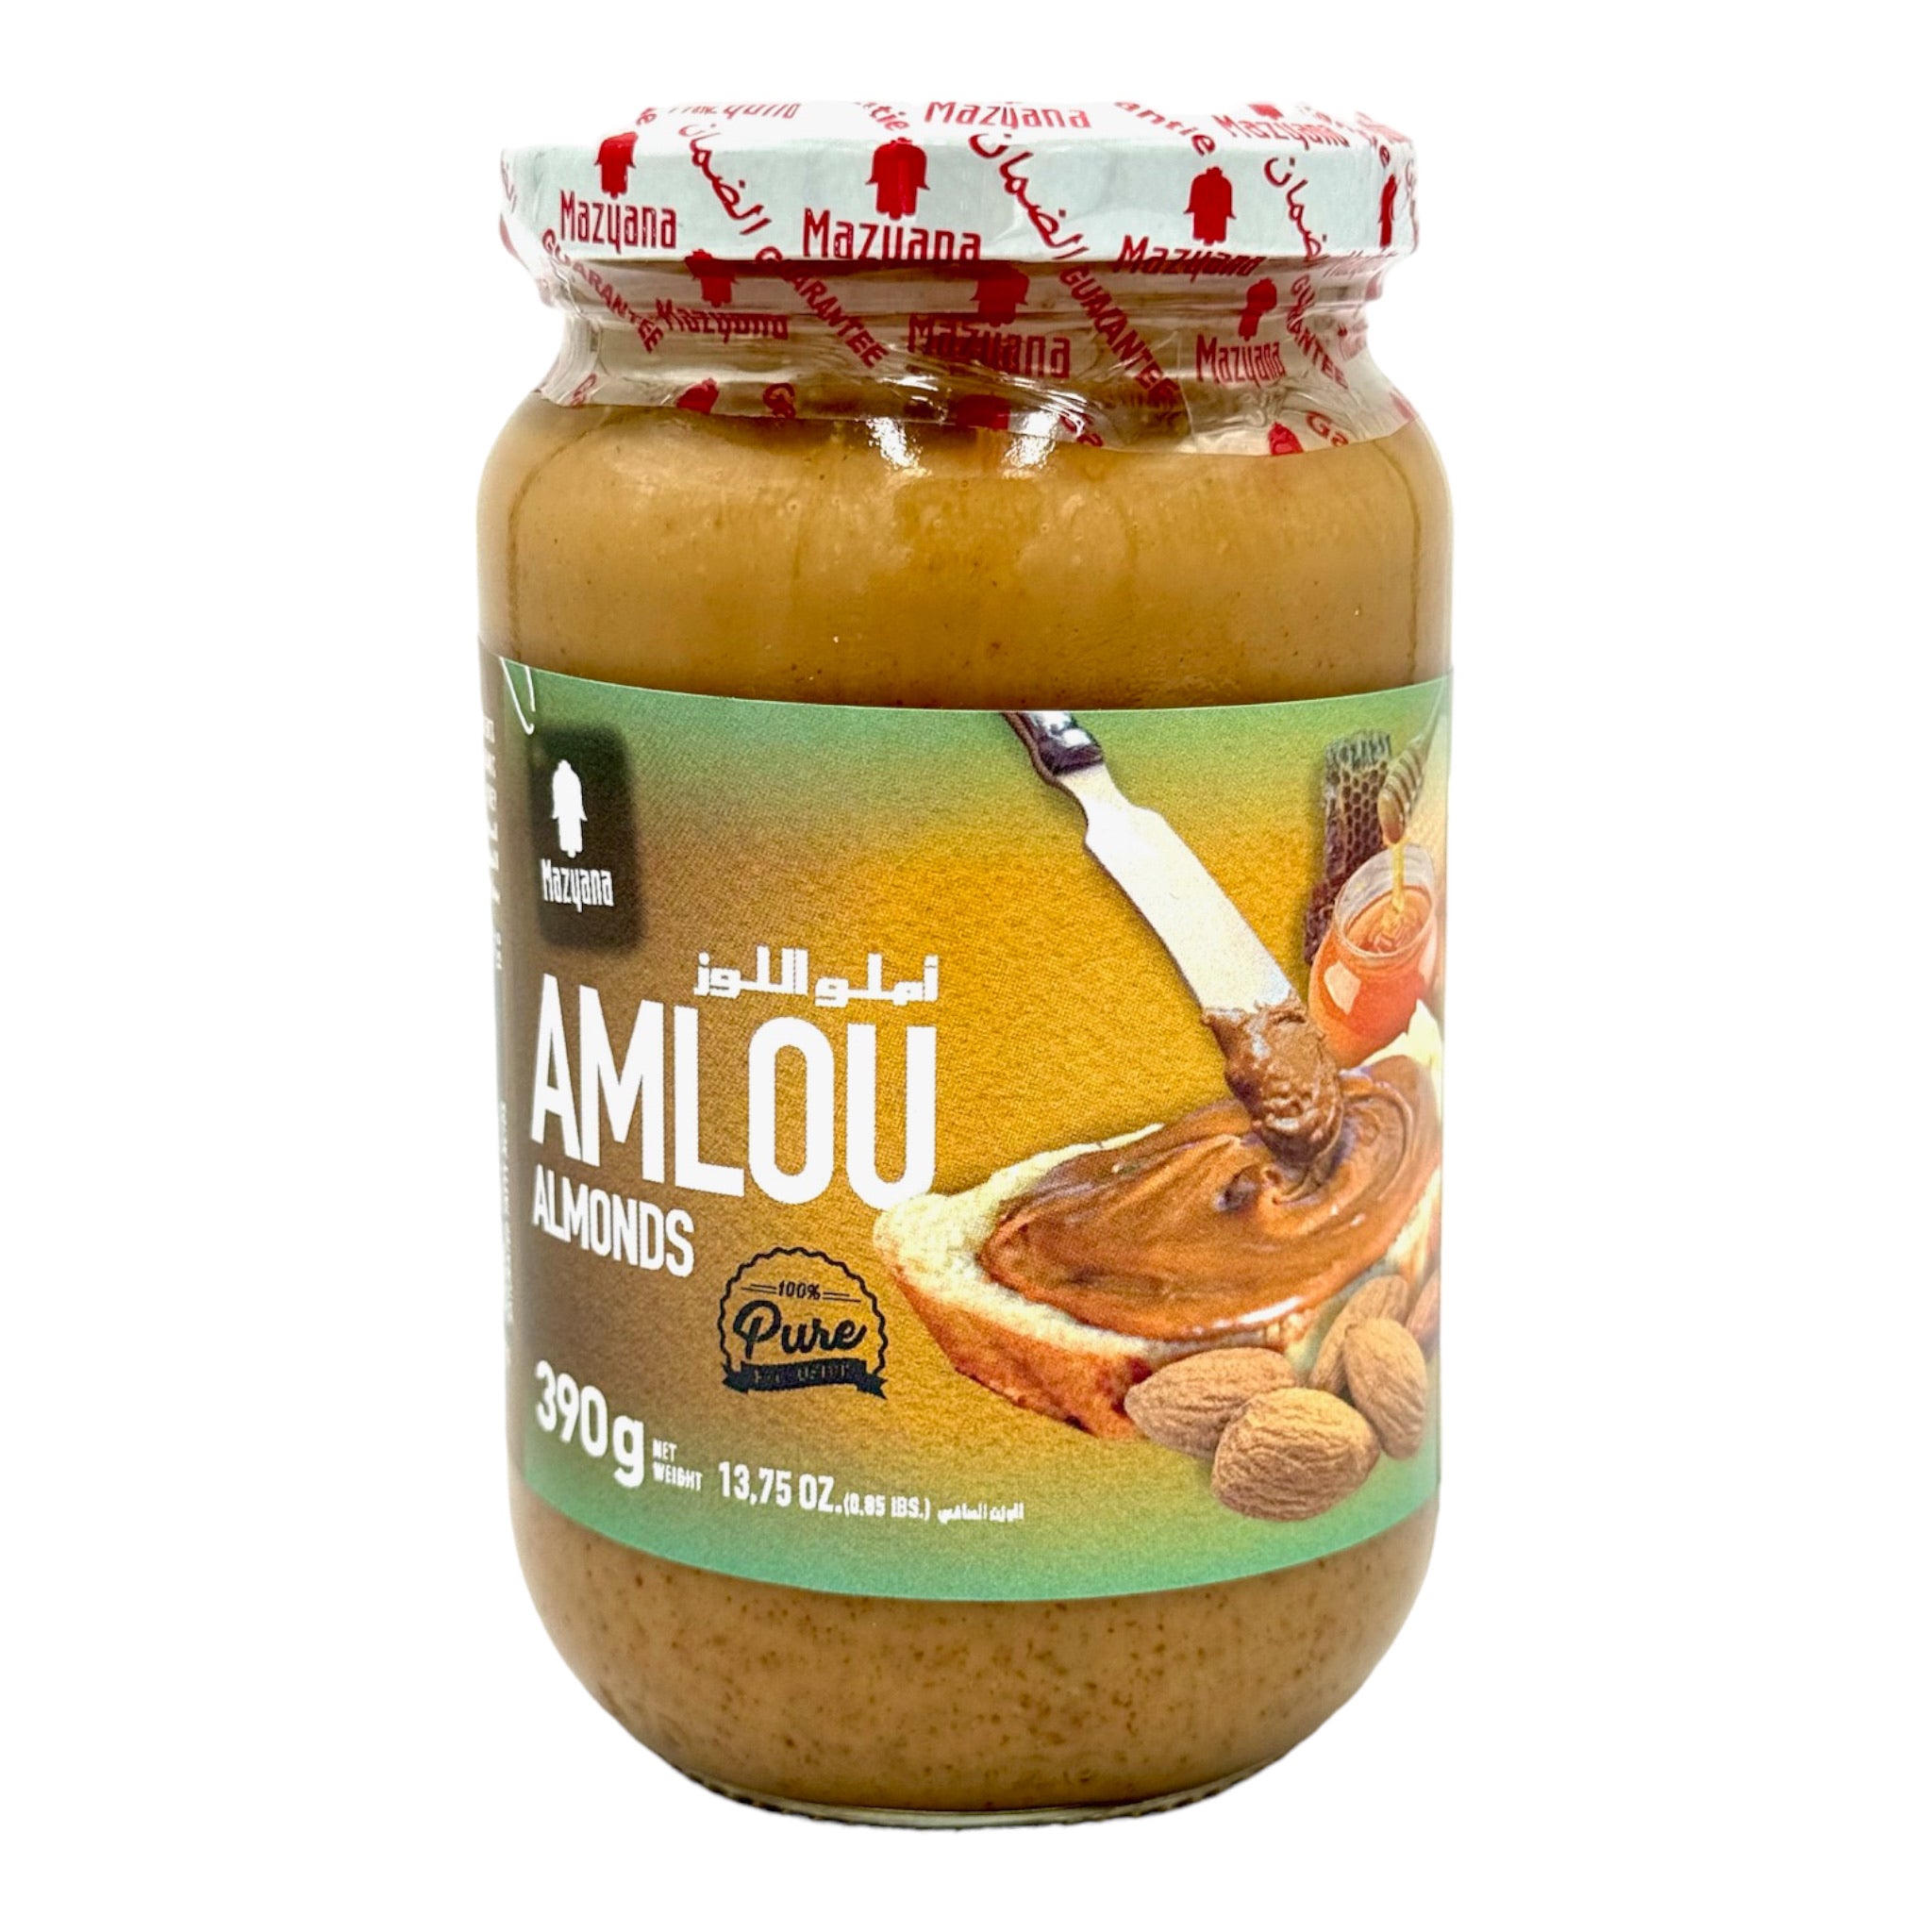 amlou from mazyana brand a delicious spread of argan oil almond butter and honey